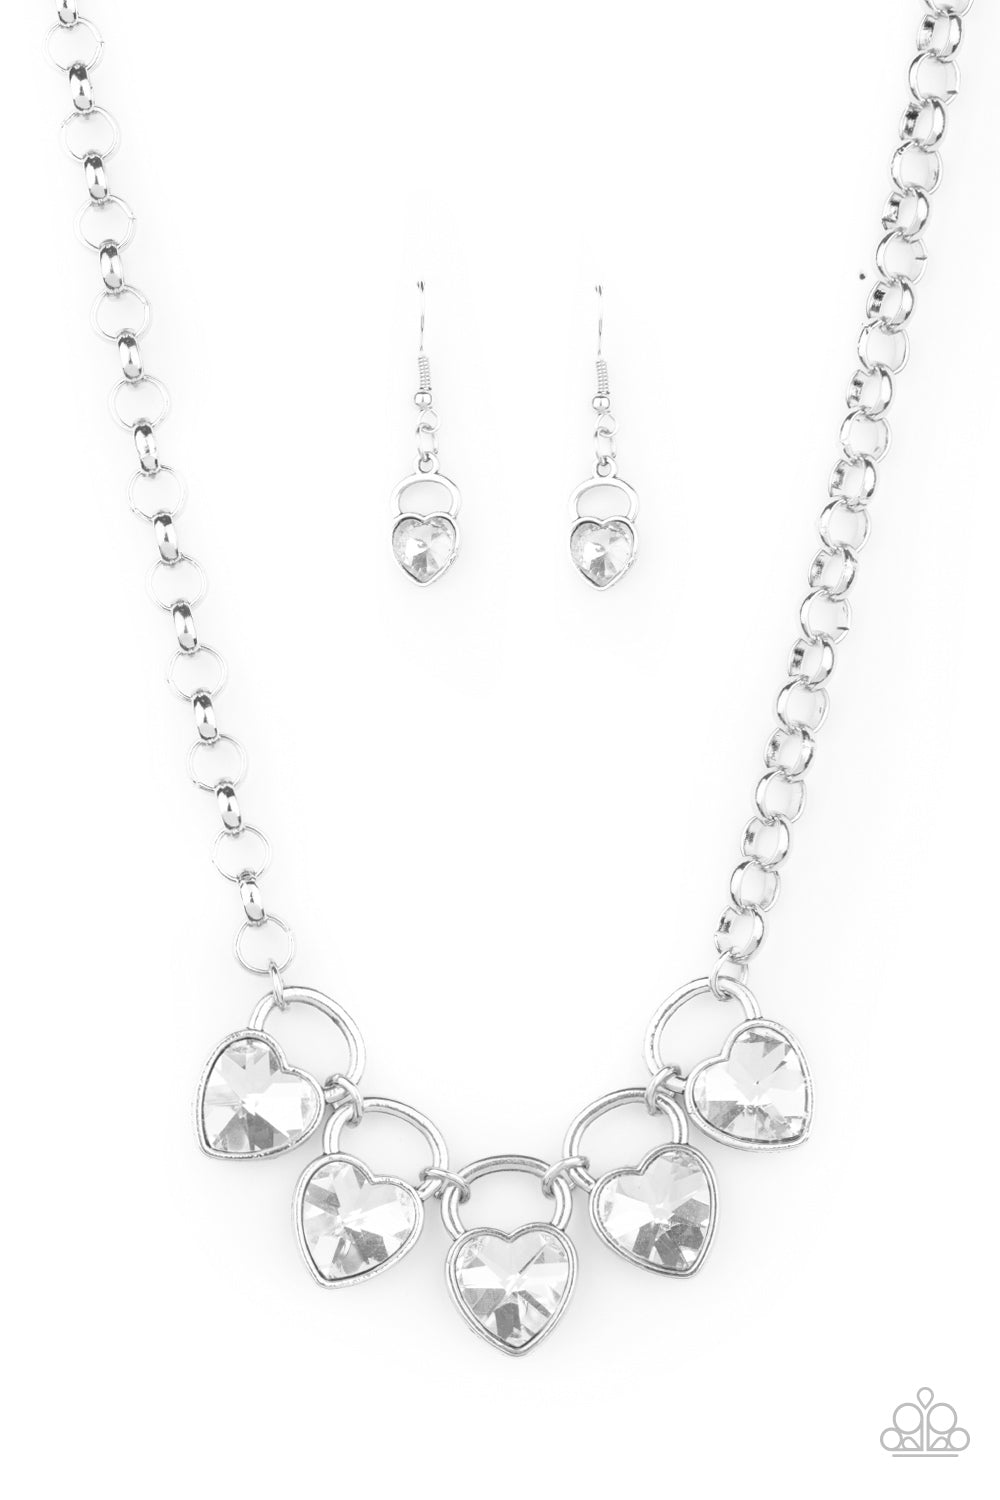 Paparazzi Accessories - HEART On Your Heels #N449 - White Necklace